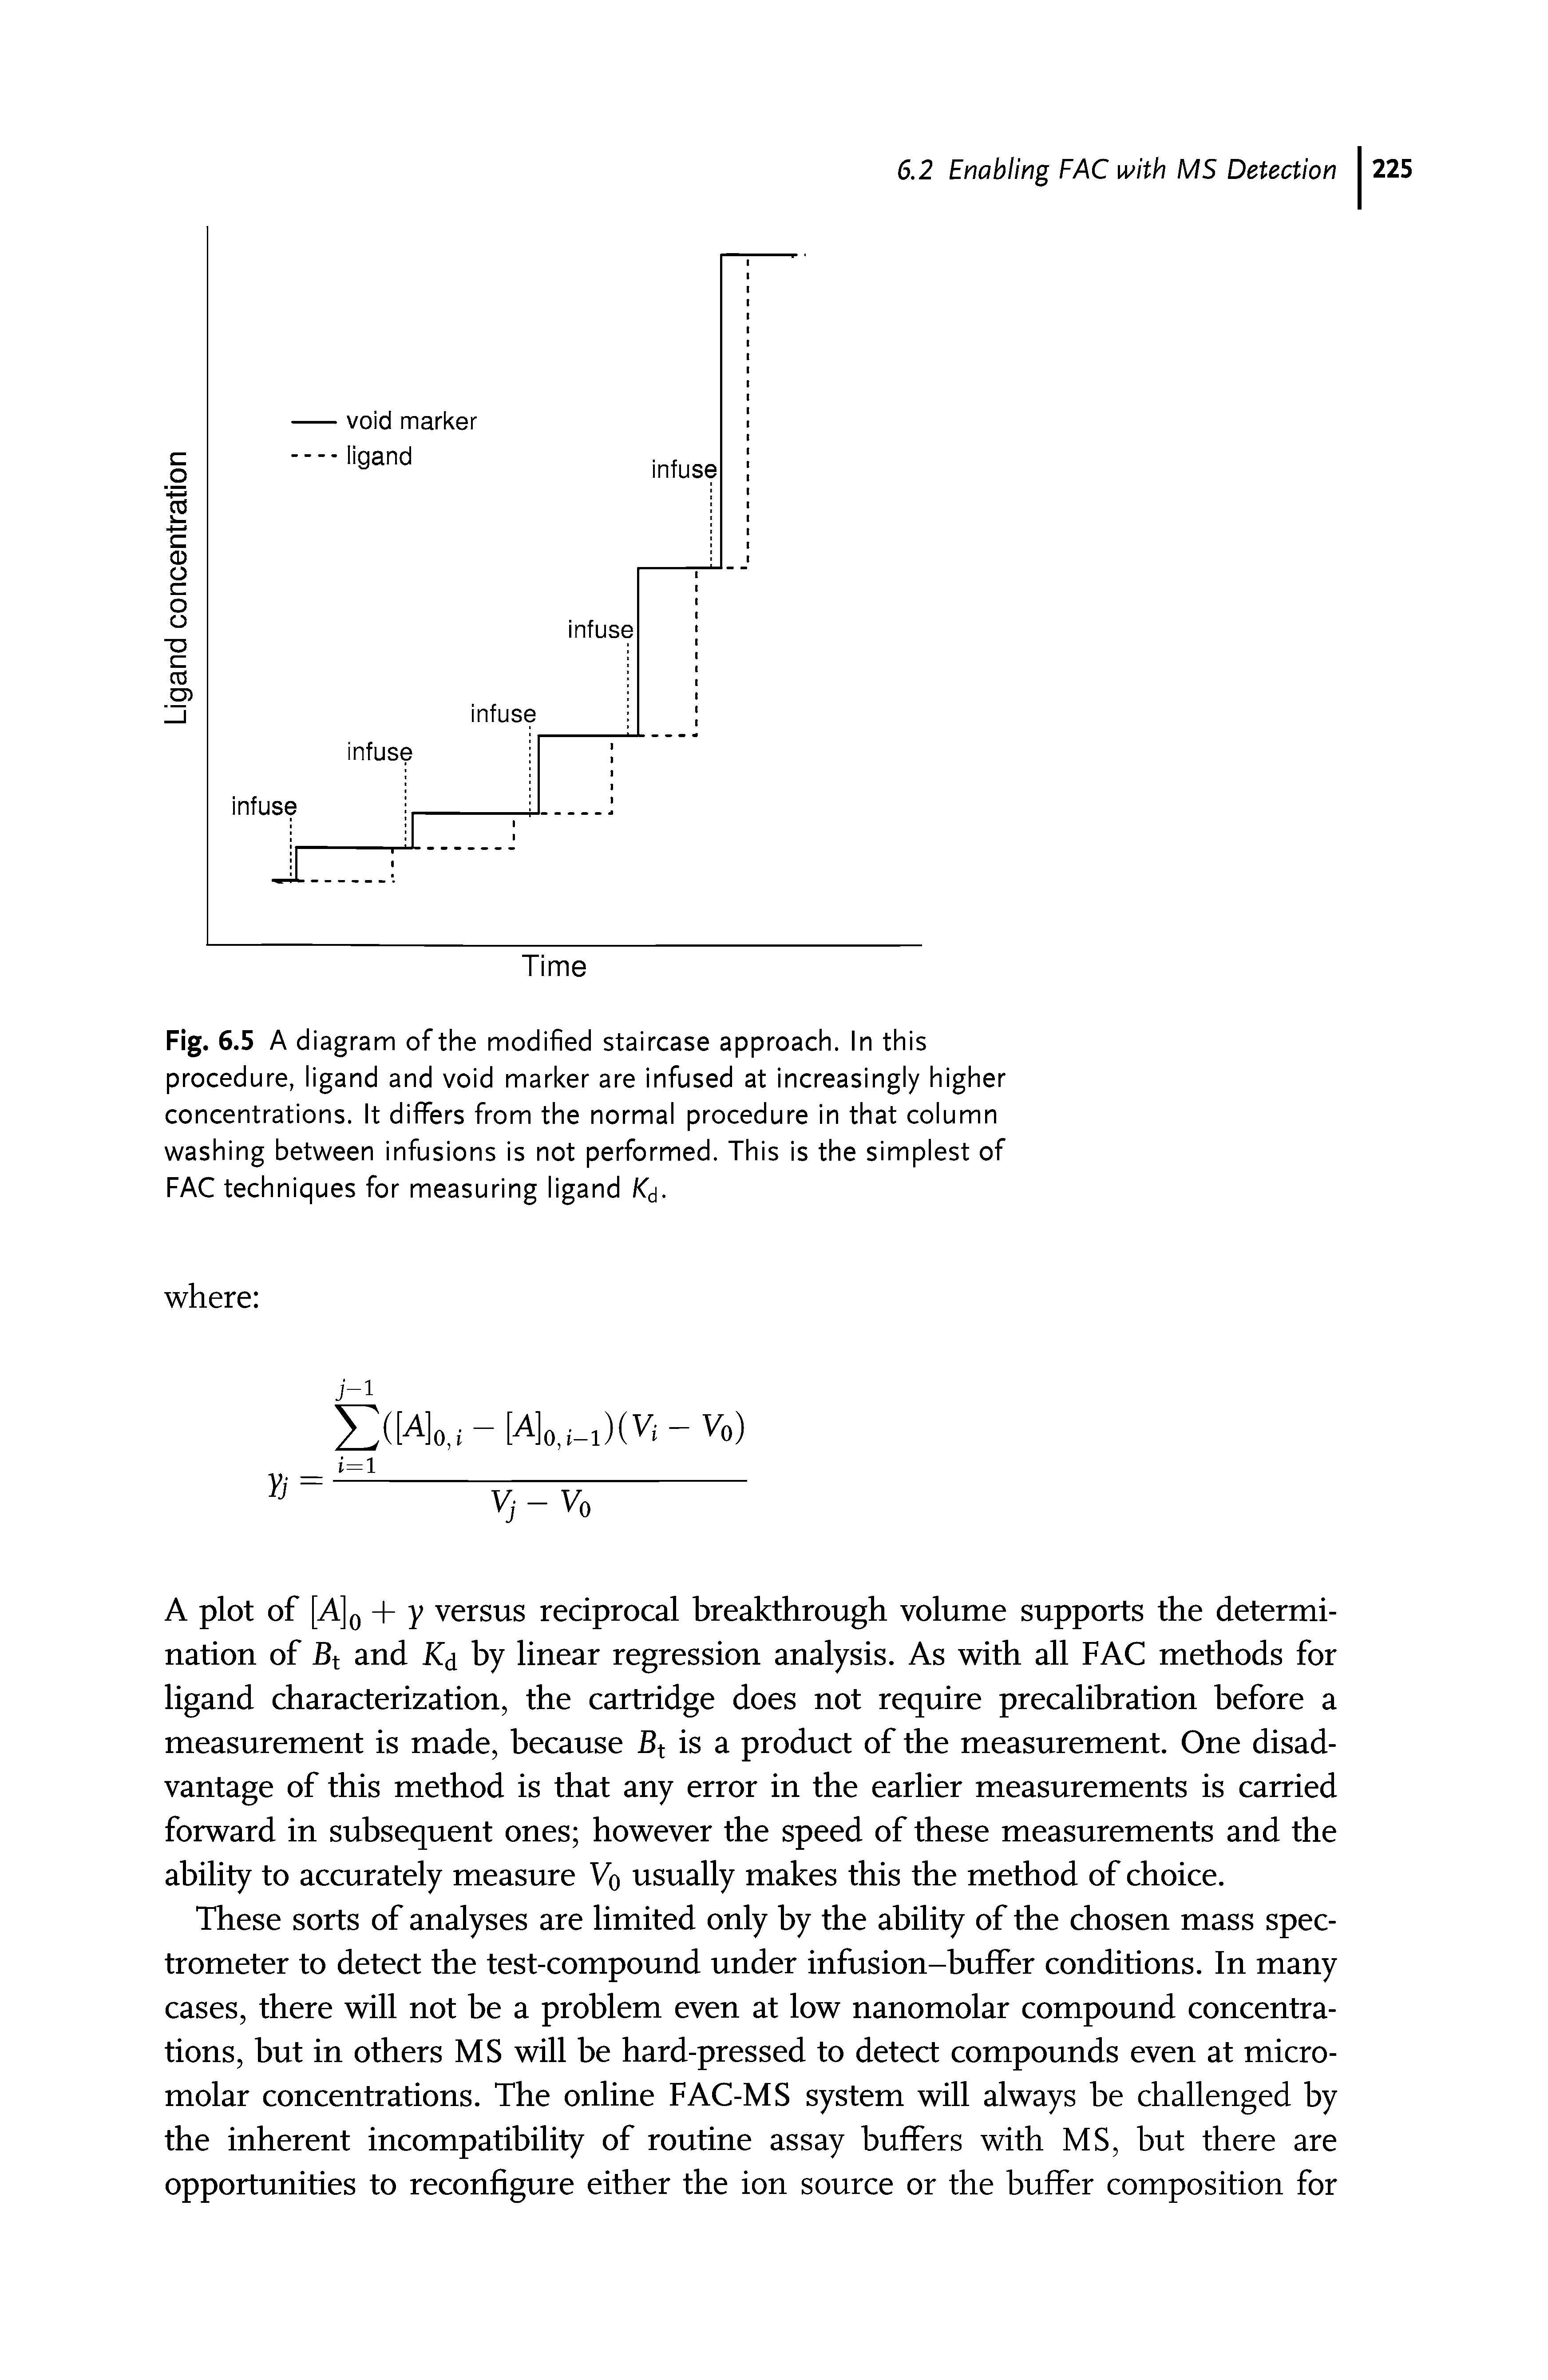 Fig. 6.5 A d iagram of the modified staircase approach. In this procedure, ligand and void marker are infused at increasingly higher concentrations. It differs from the normal procedure in that column washing between infusions is not performed. This is the simplest of FAC techniques for measuring ligand K. ...